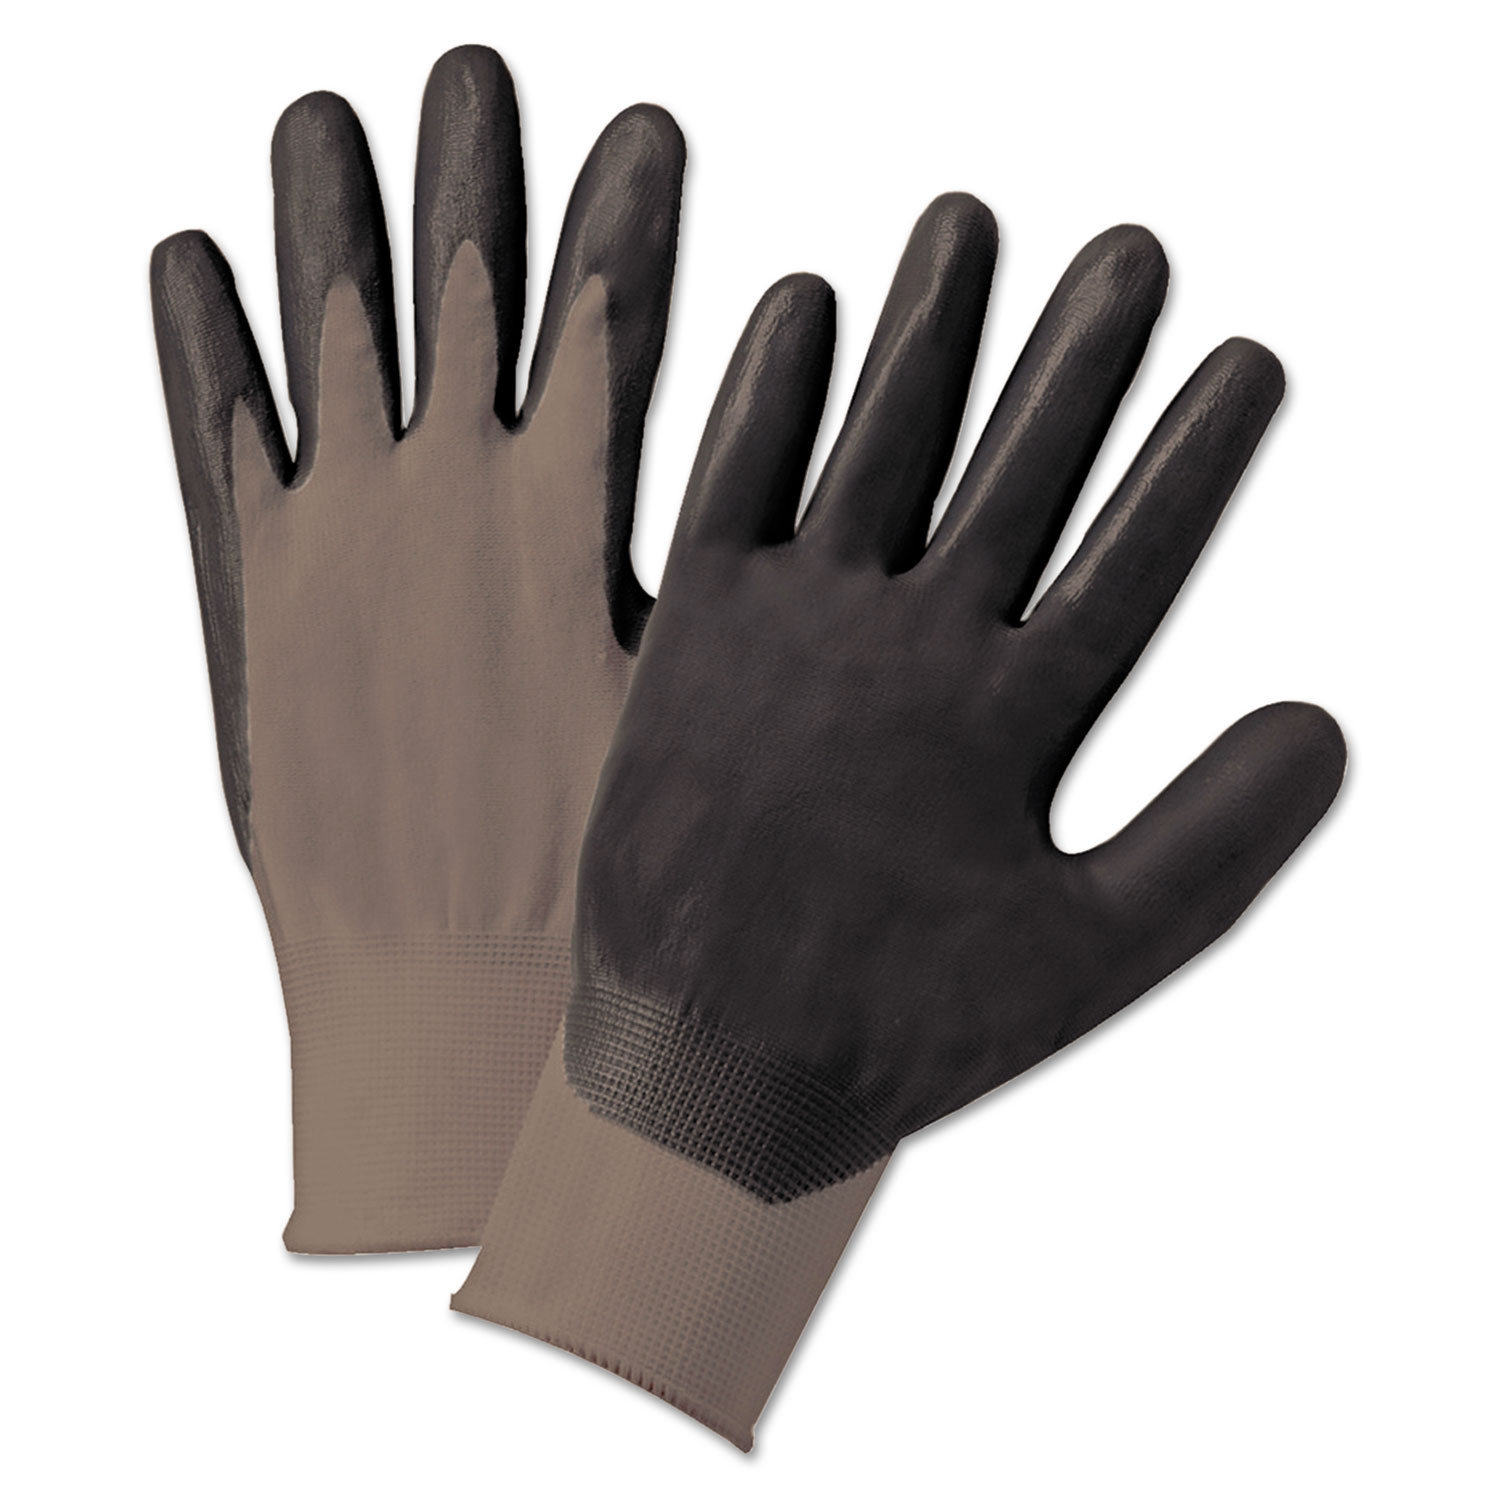  Anchor Brand 6020-L Nitrile Coated Gloves, Gray/Dark Gray, Nylon Knit, Large, 12 Pairs (ANR6020L) 